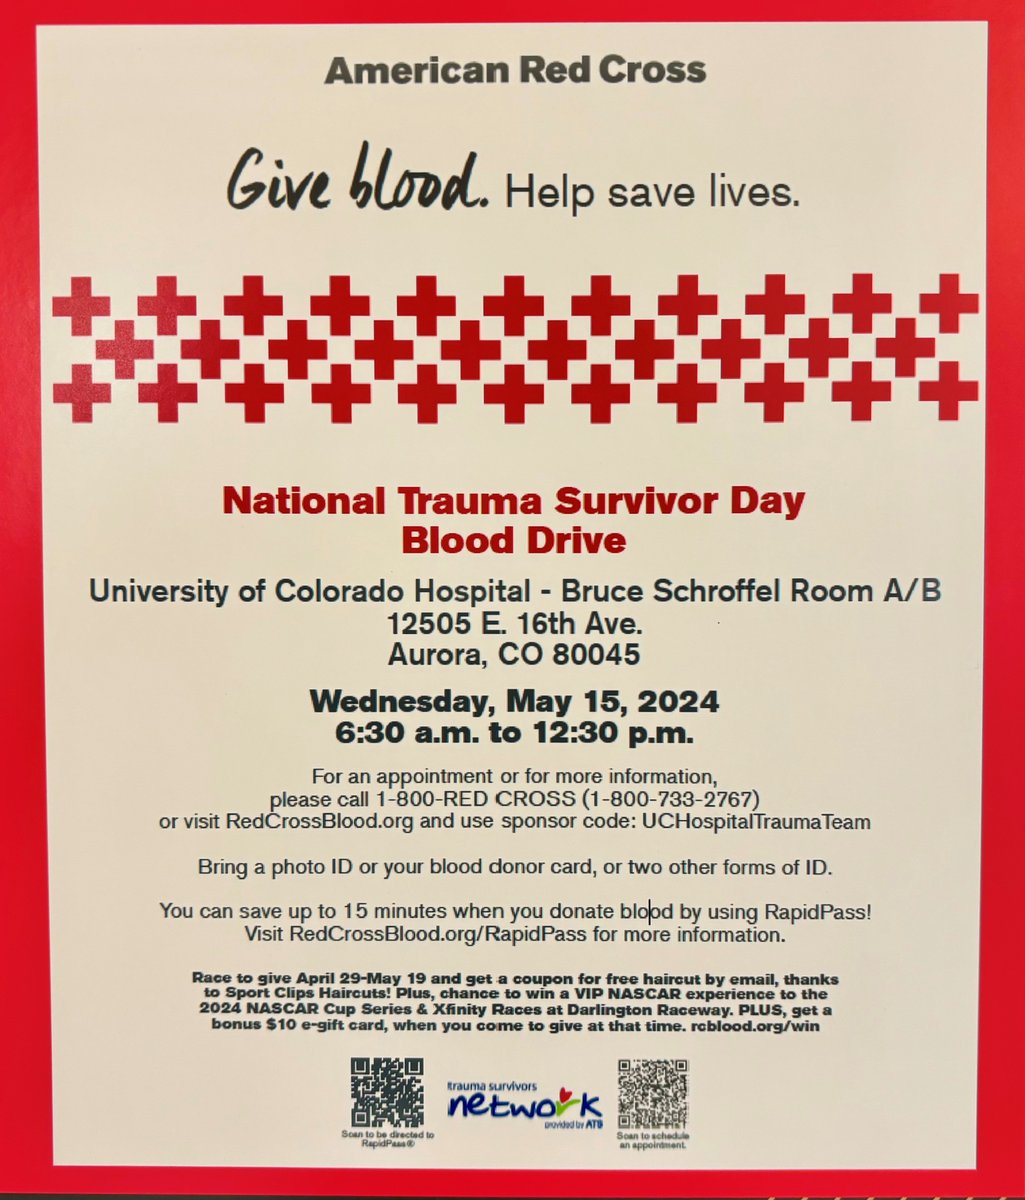 You too can contribute to National Trauma Awareness Month! A selfless act of donating blood can help save lives, and it only takes a short amount of time. See below for details! @uchealth @RedCross